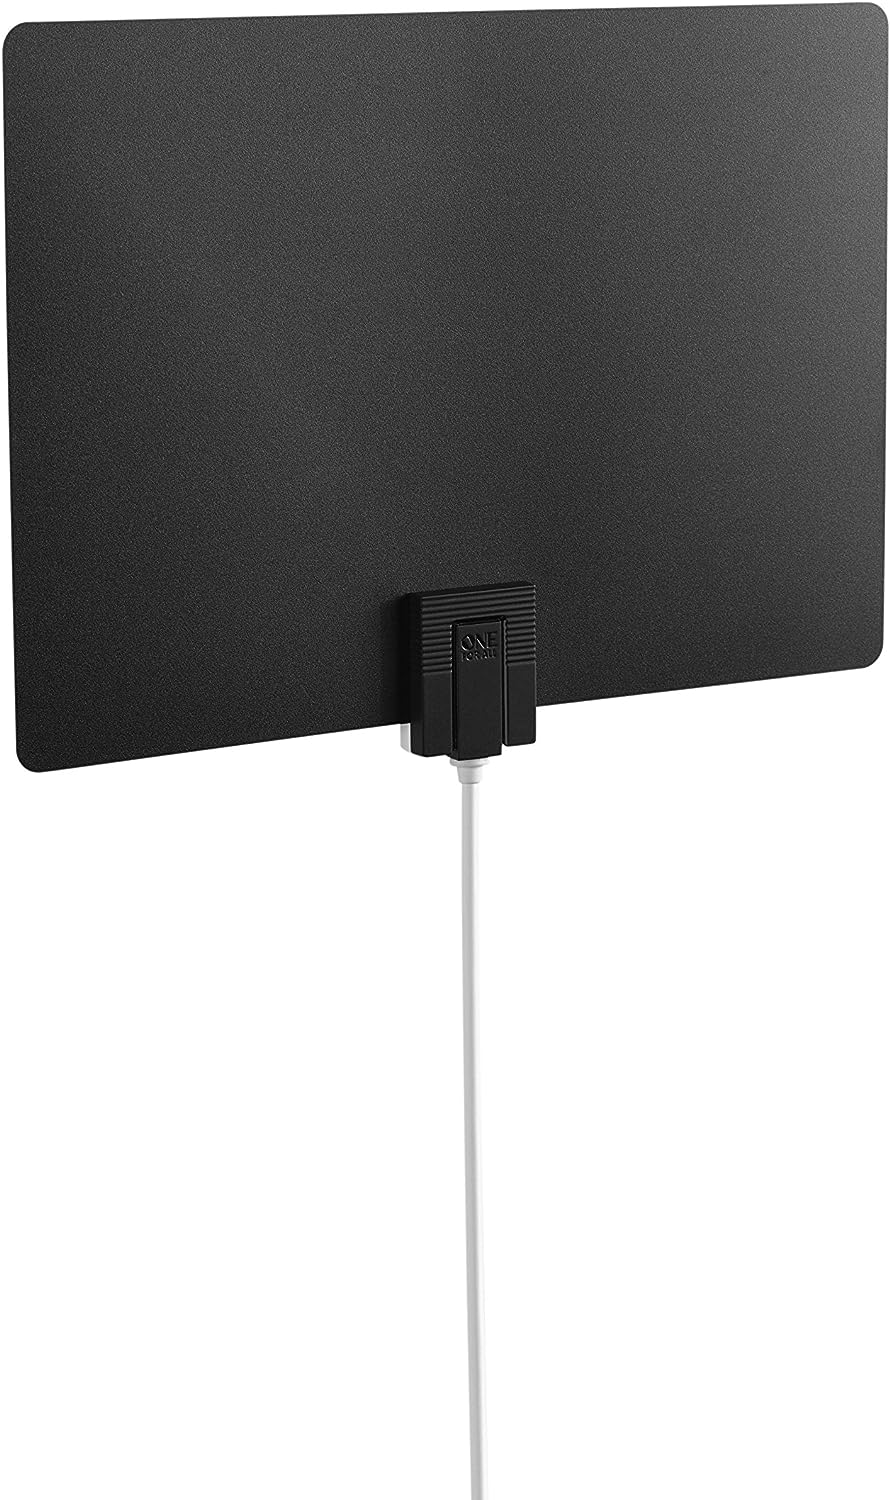 One For All Amplified HDTV Antenna for 1080P 4K Free [...]